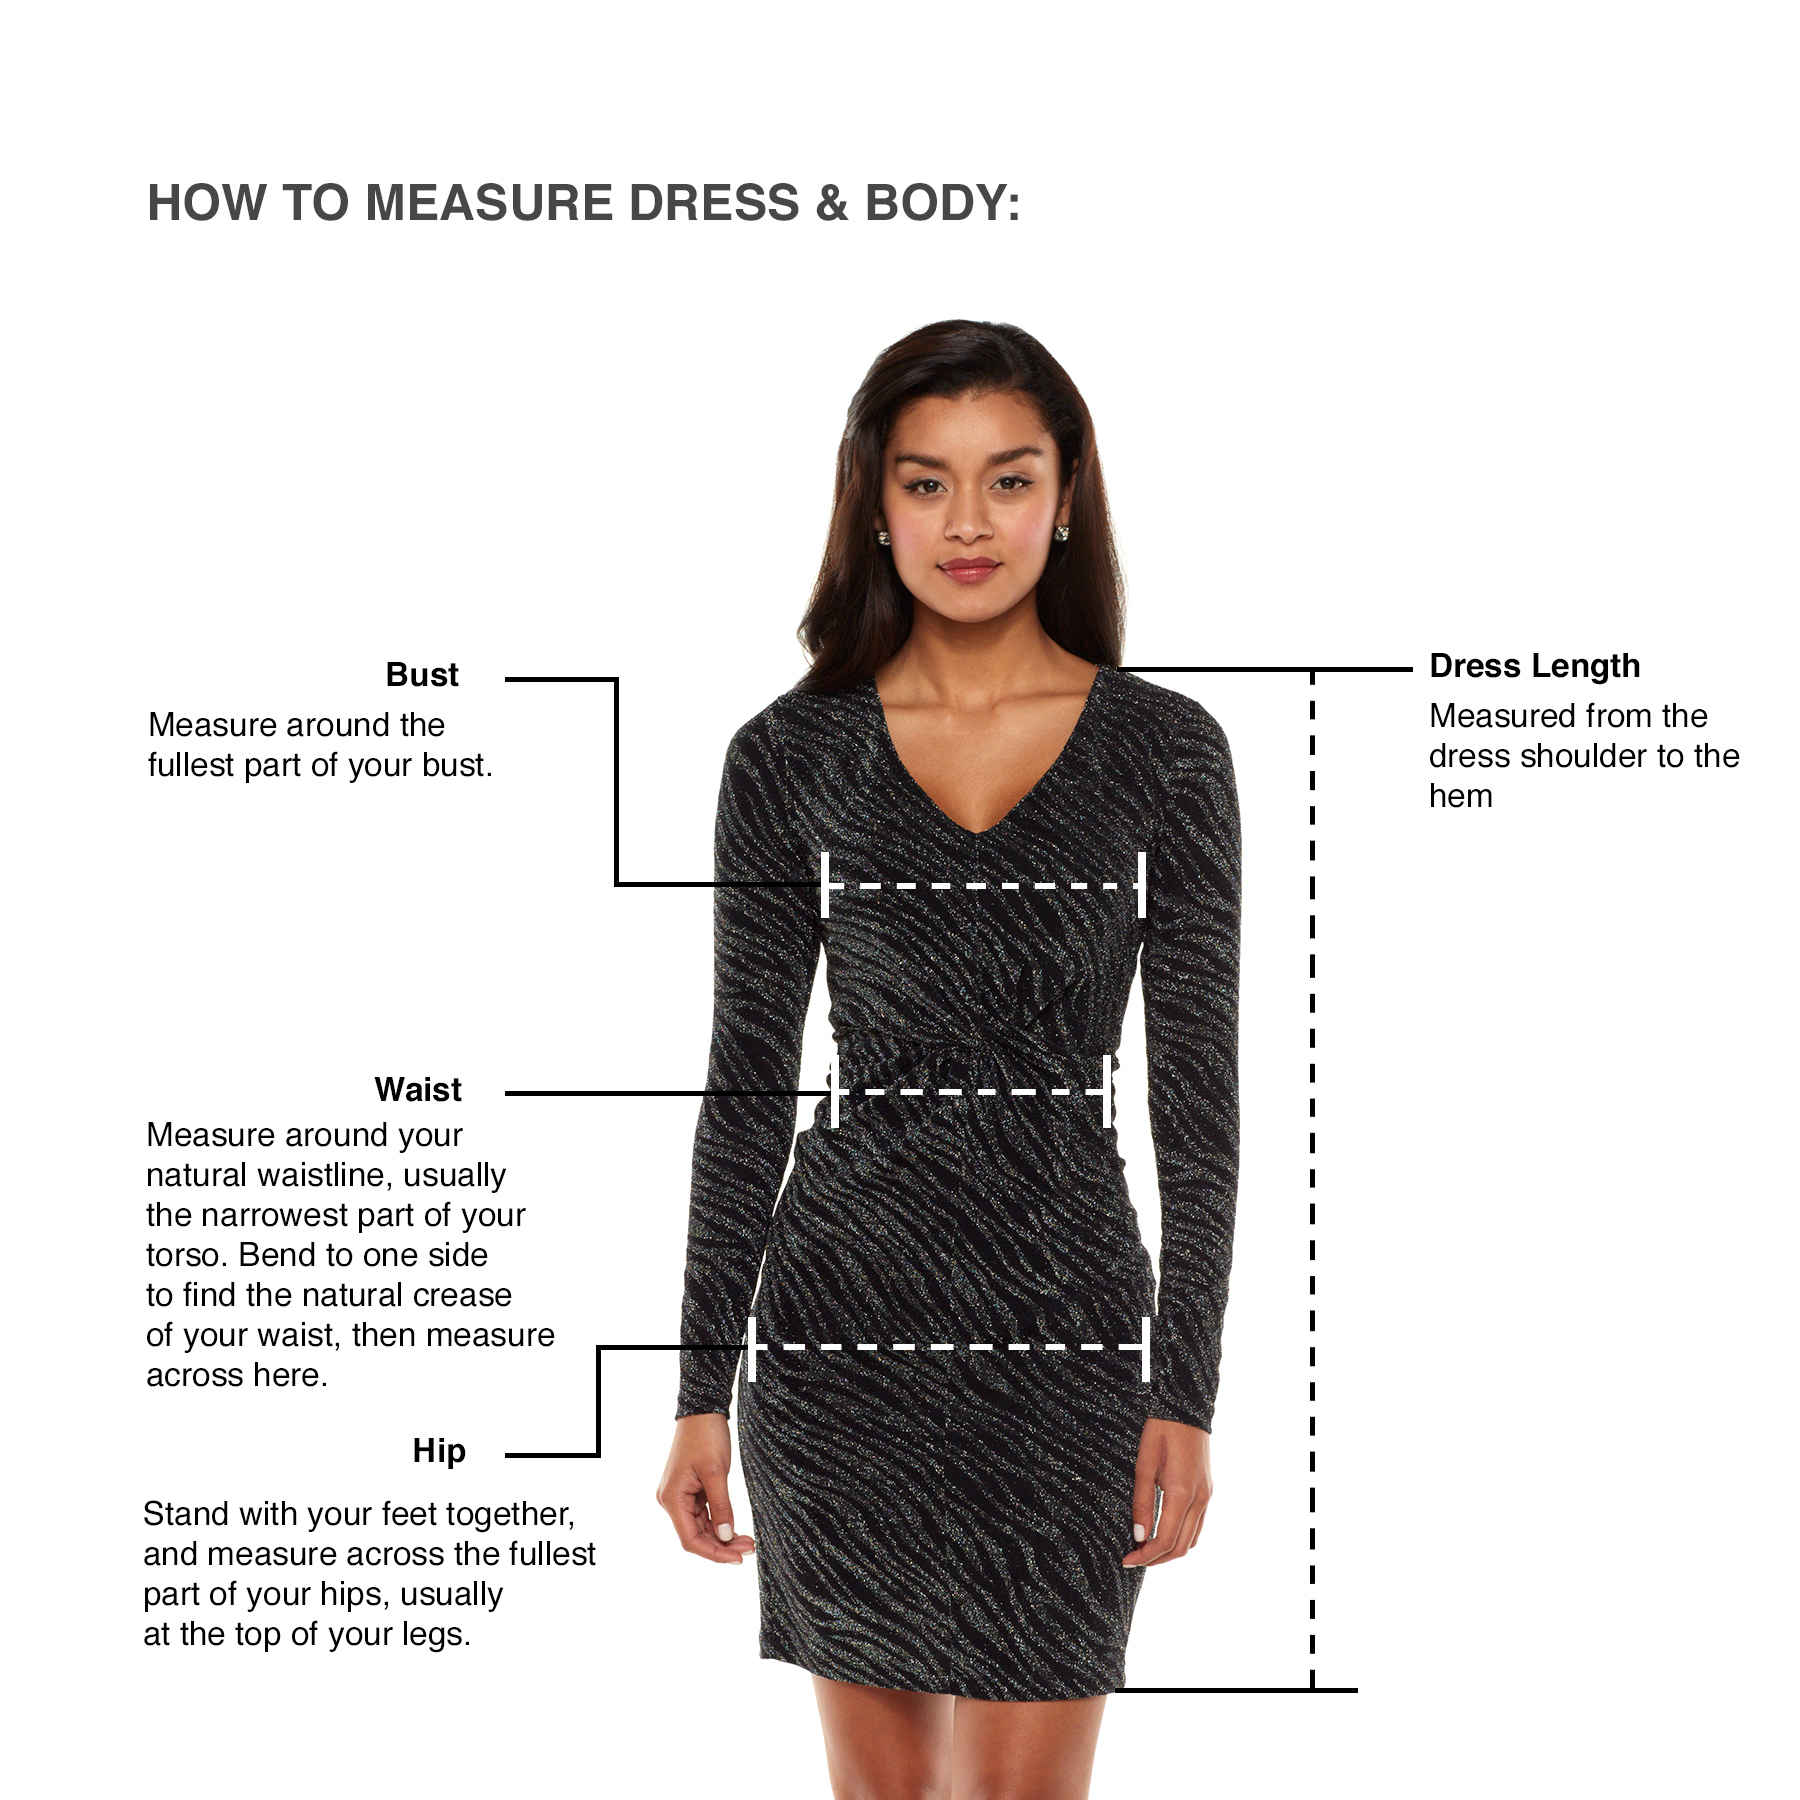 How to Measure Dress Size | Kohl's